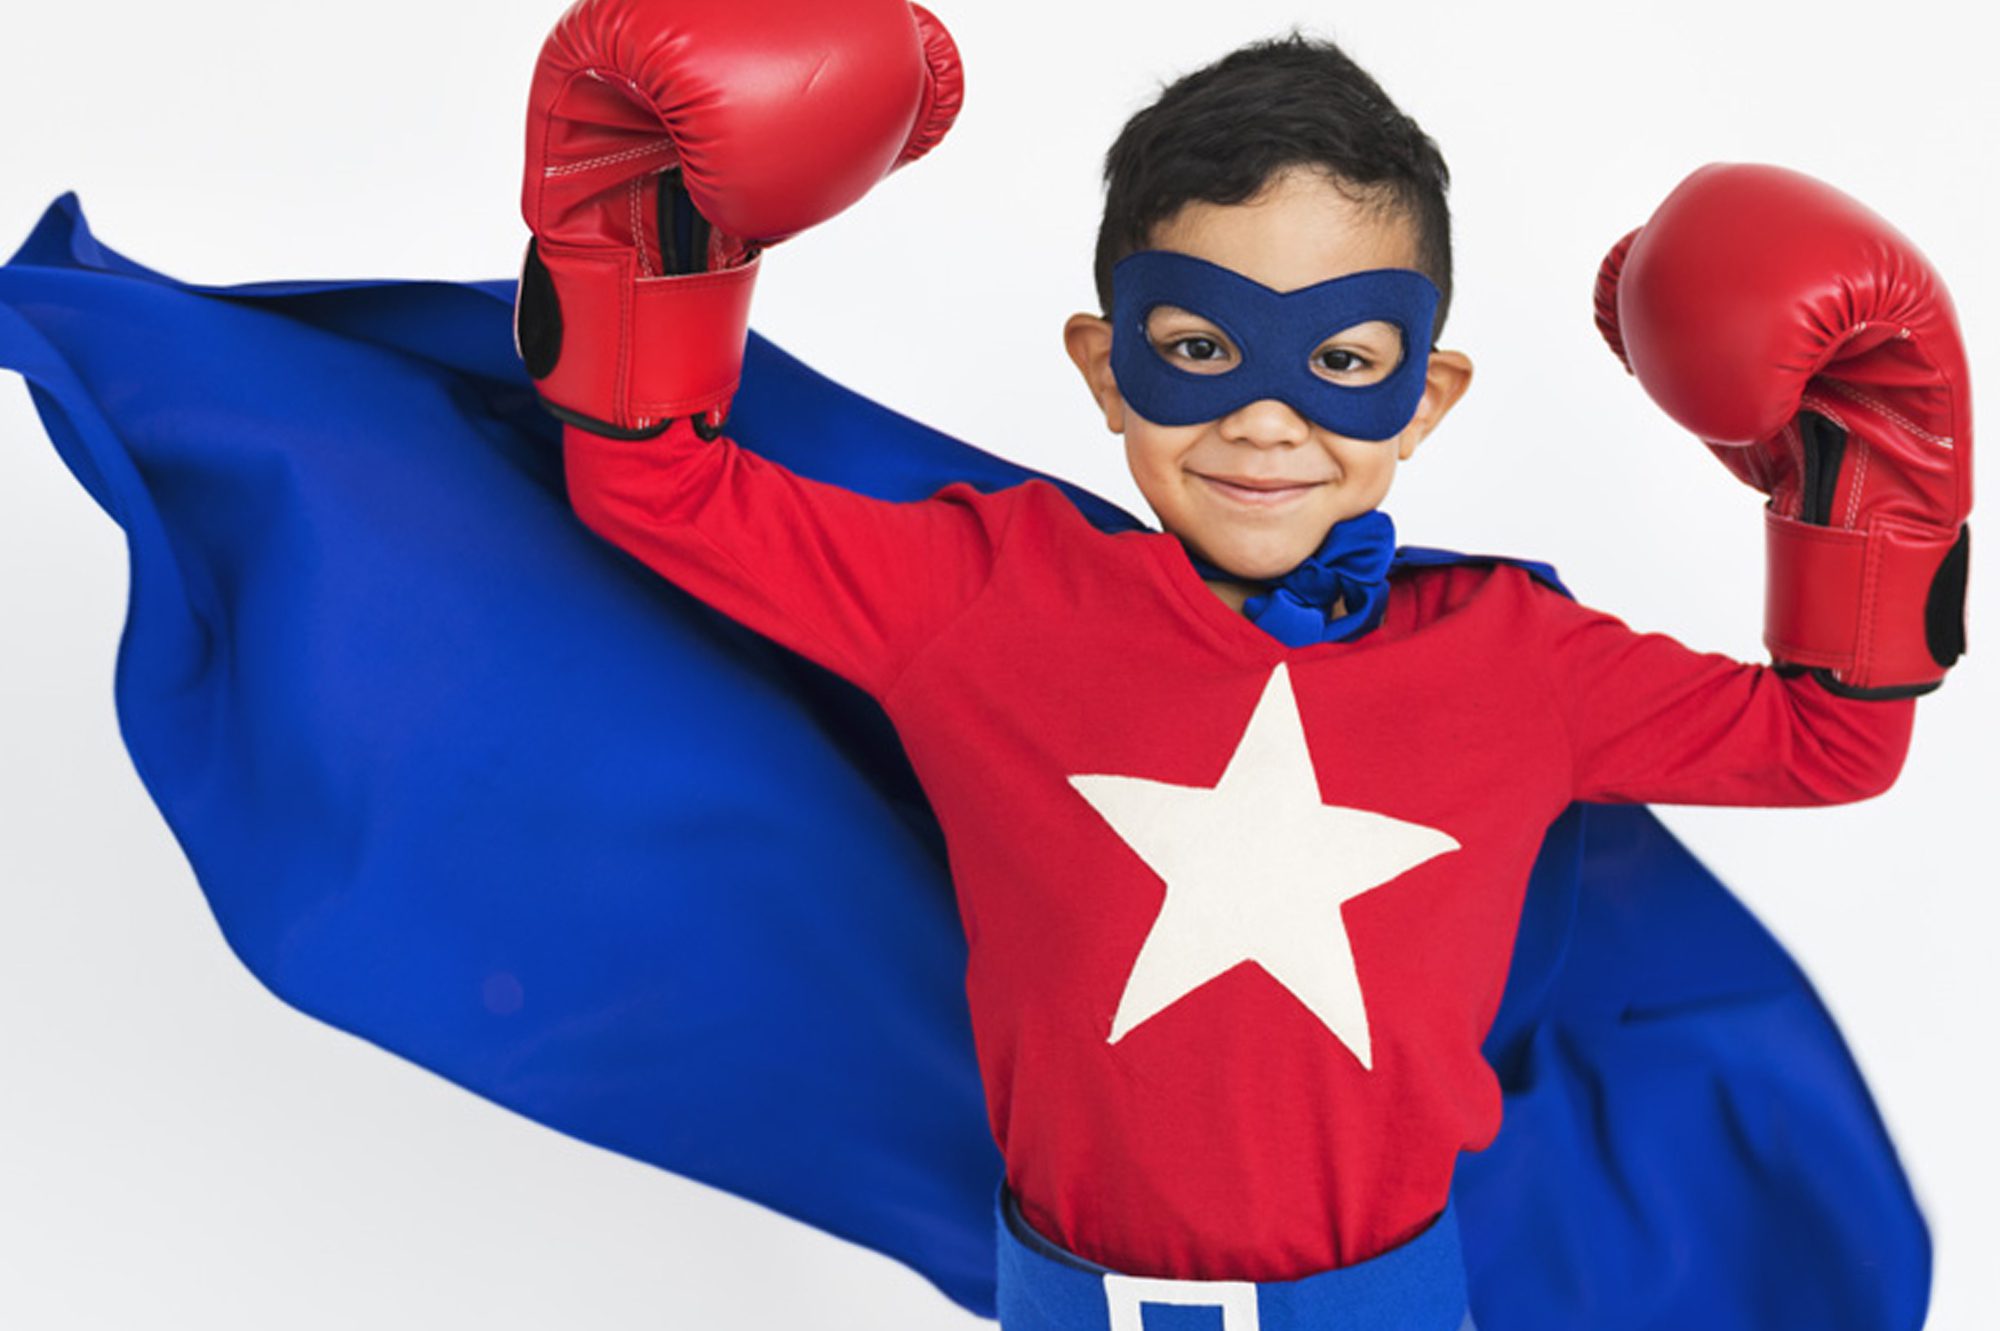 Little boy dressed as a superhero with red shirt and a white star, blue cape and mask, and red boxer gloves.